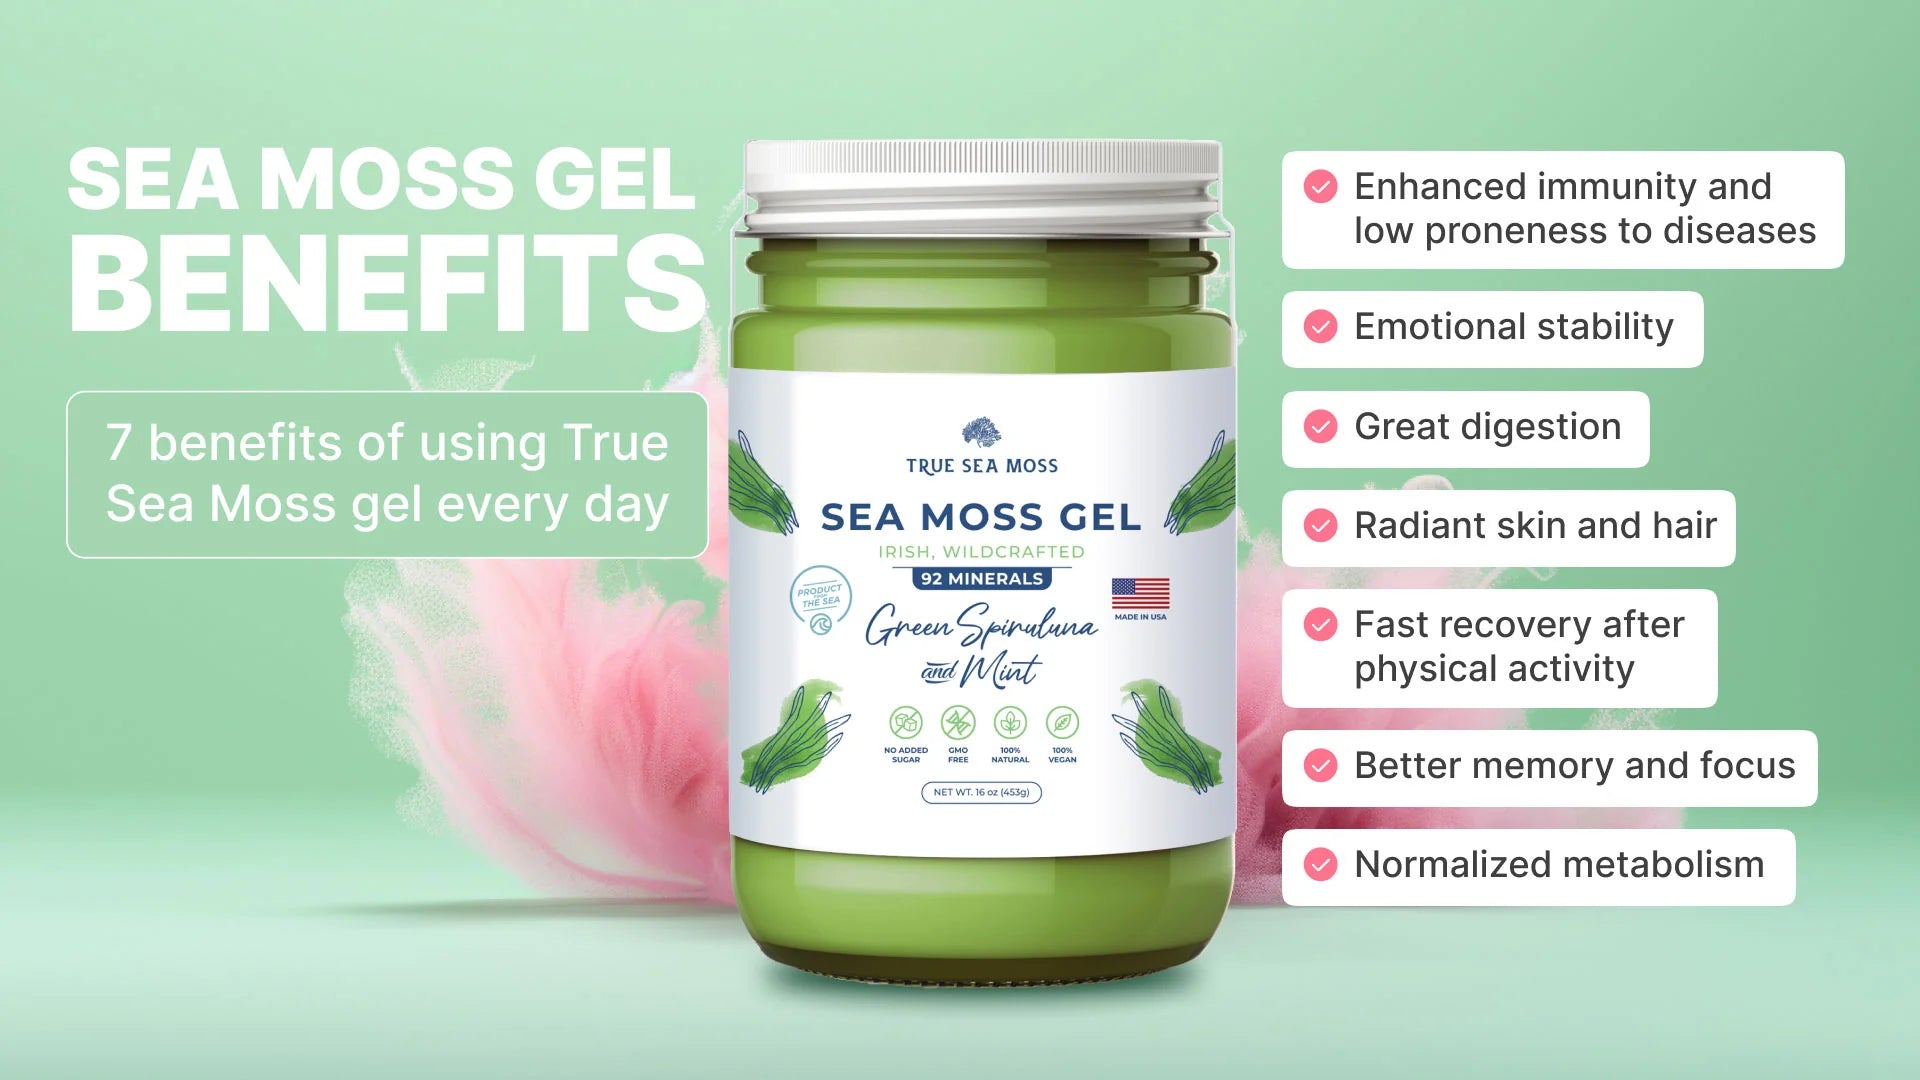 Sea moss gel and its benefits for the organism